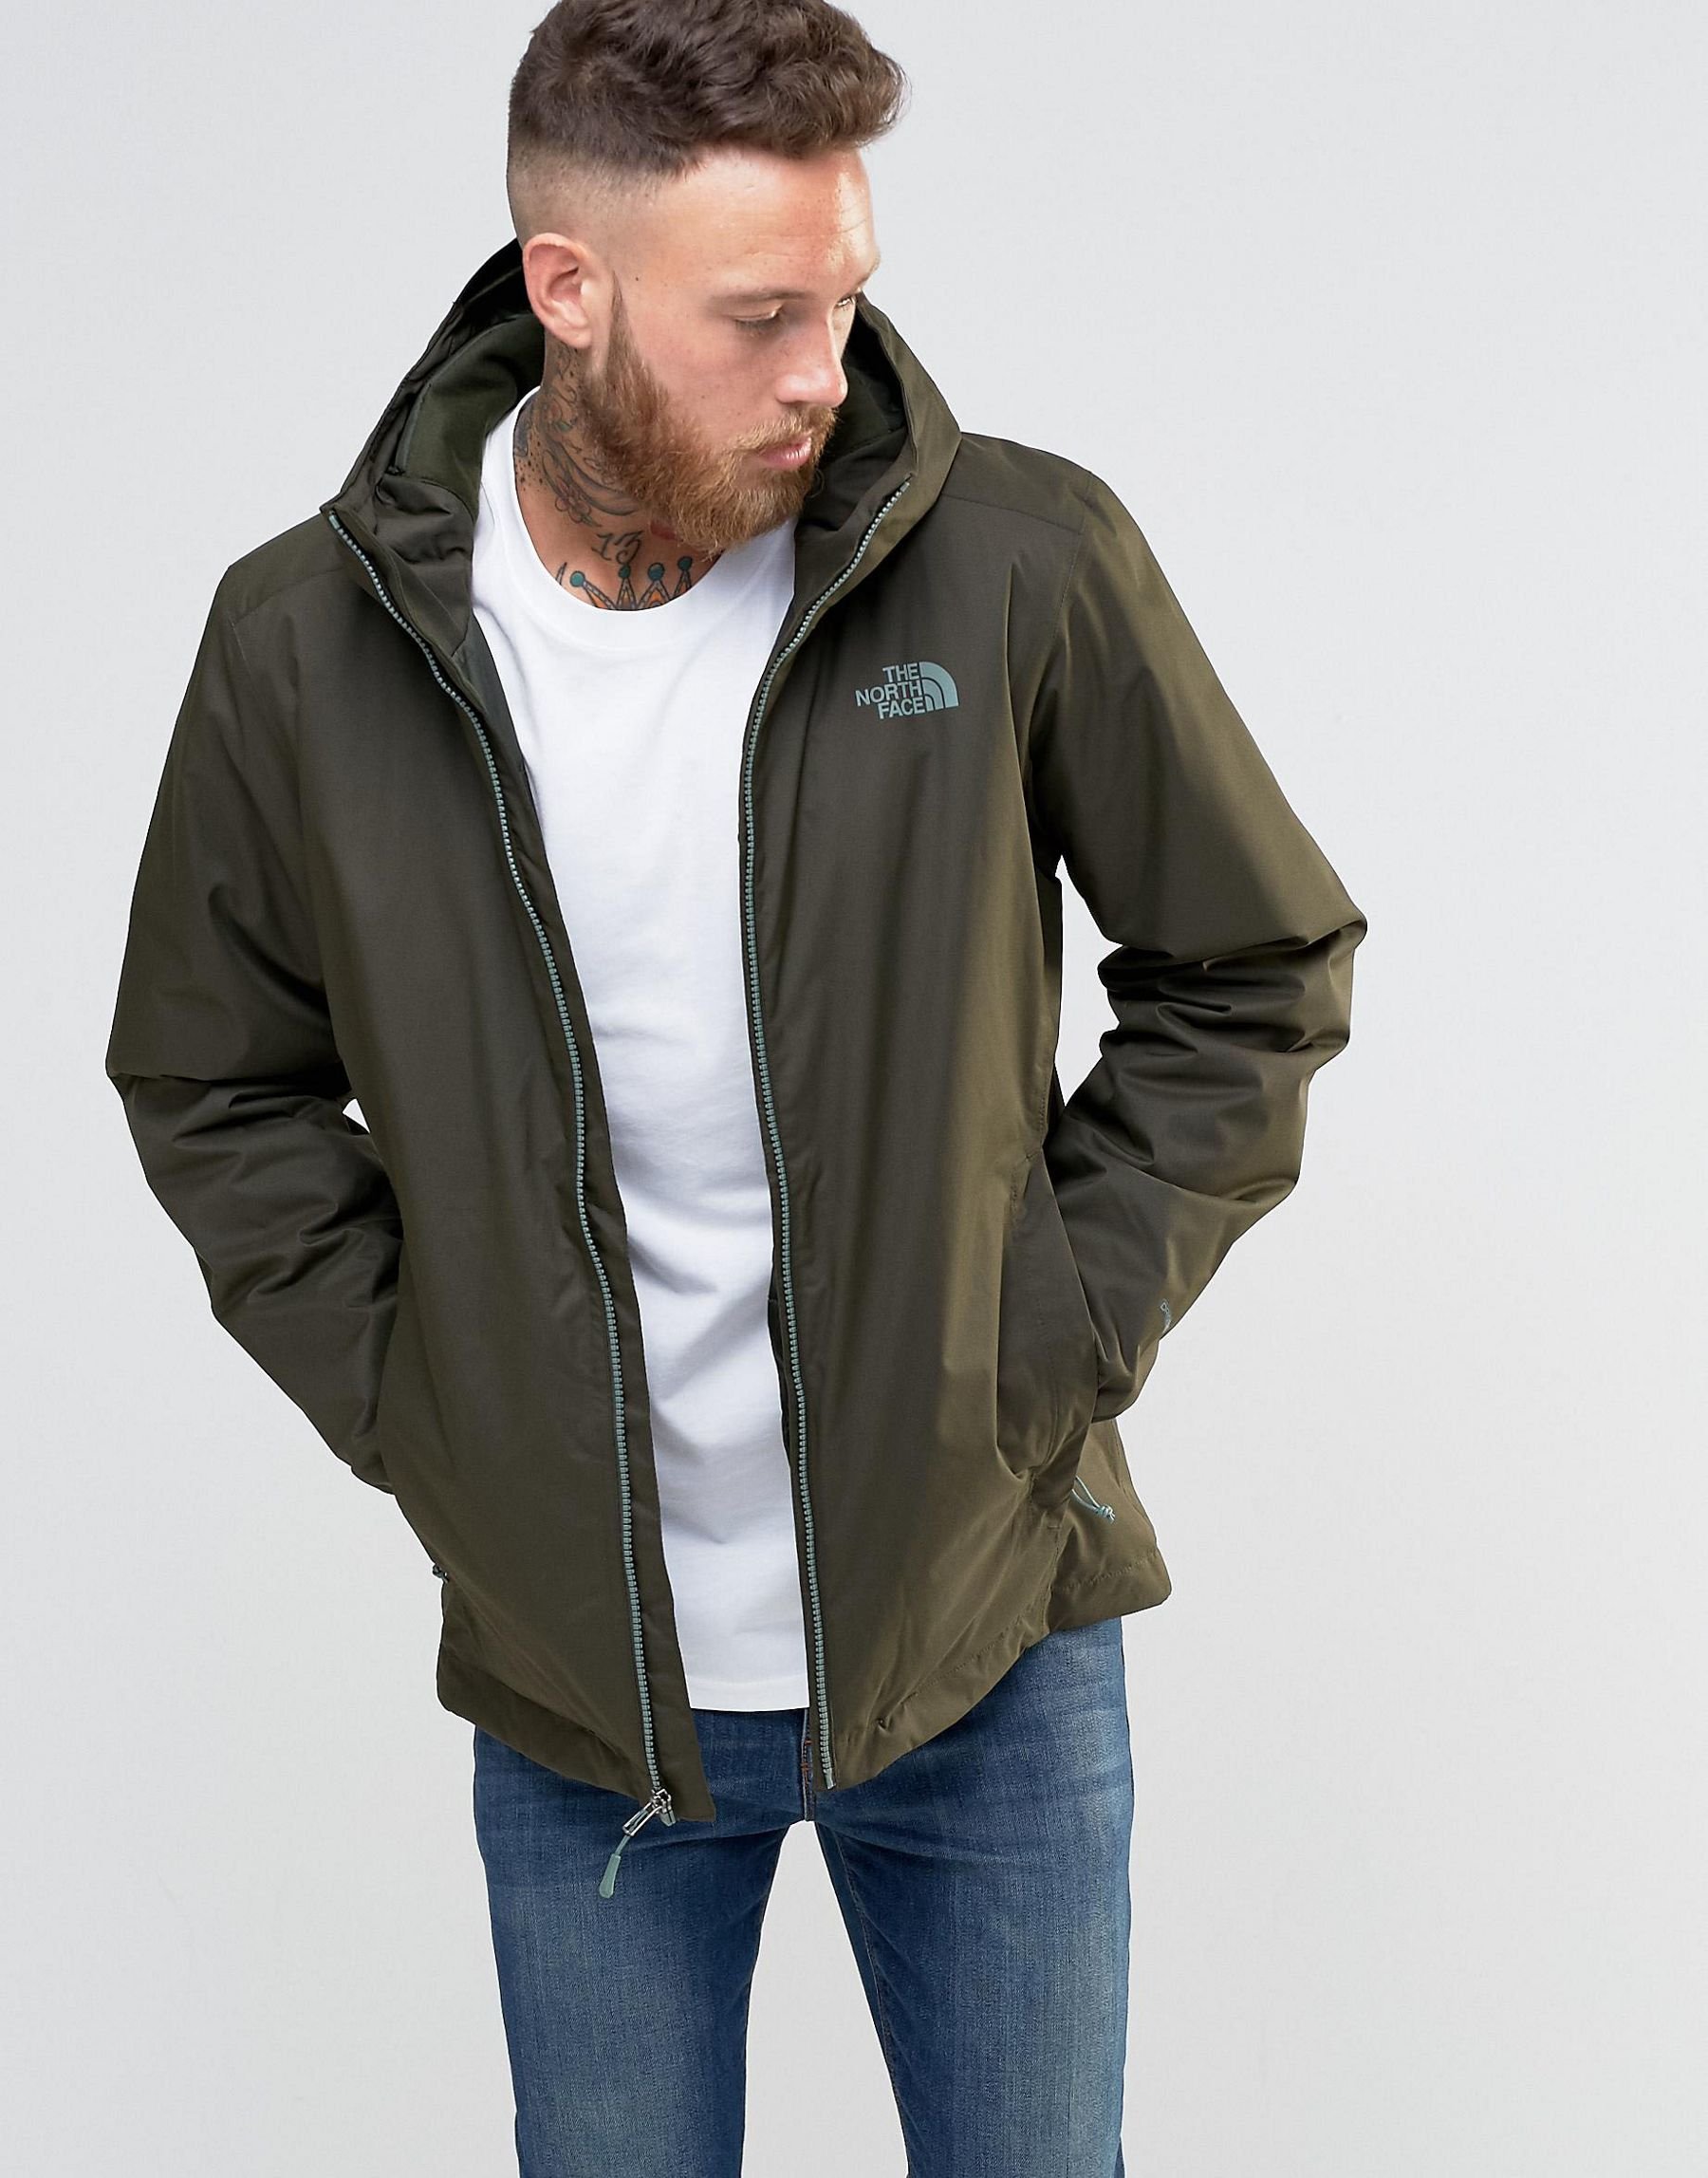 quest insulated north face jacket